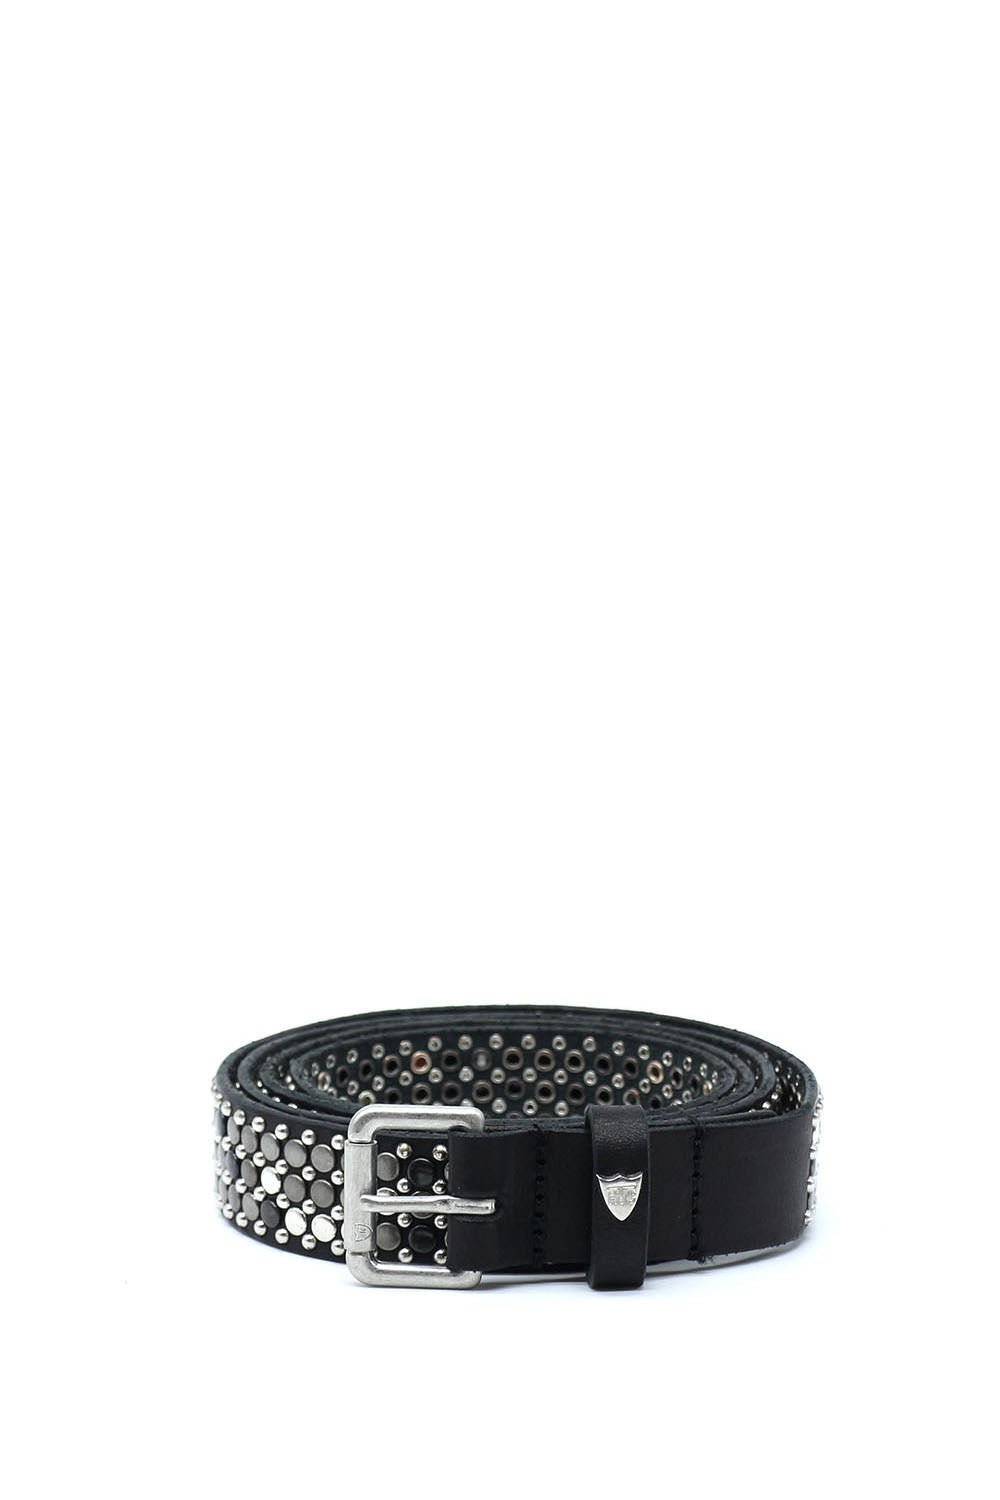 NEST SLIM BELT Black leather belt with mixed studs .Height: 3 cm. Made in Italy. HTC LOS ANGELES